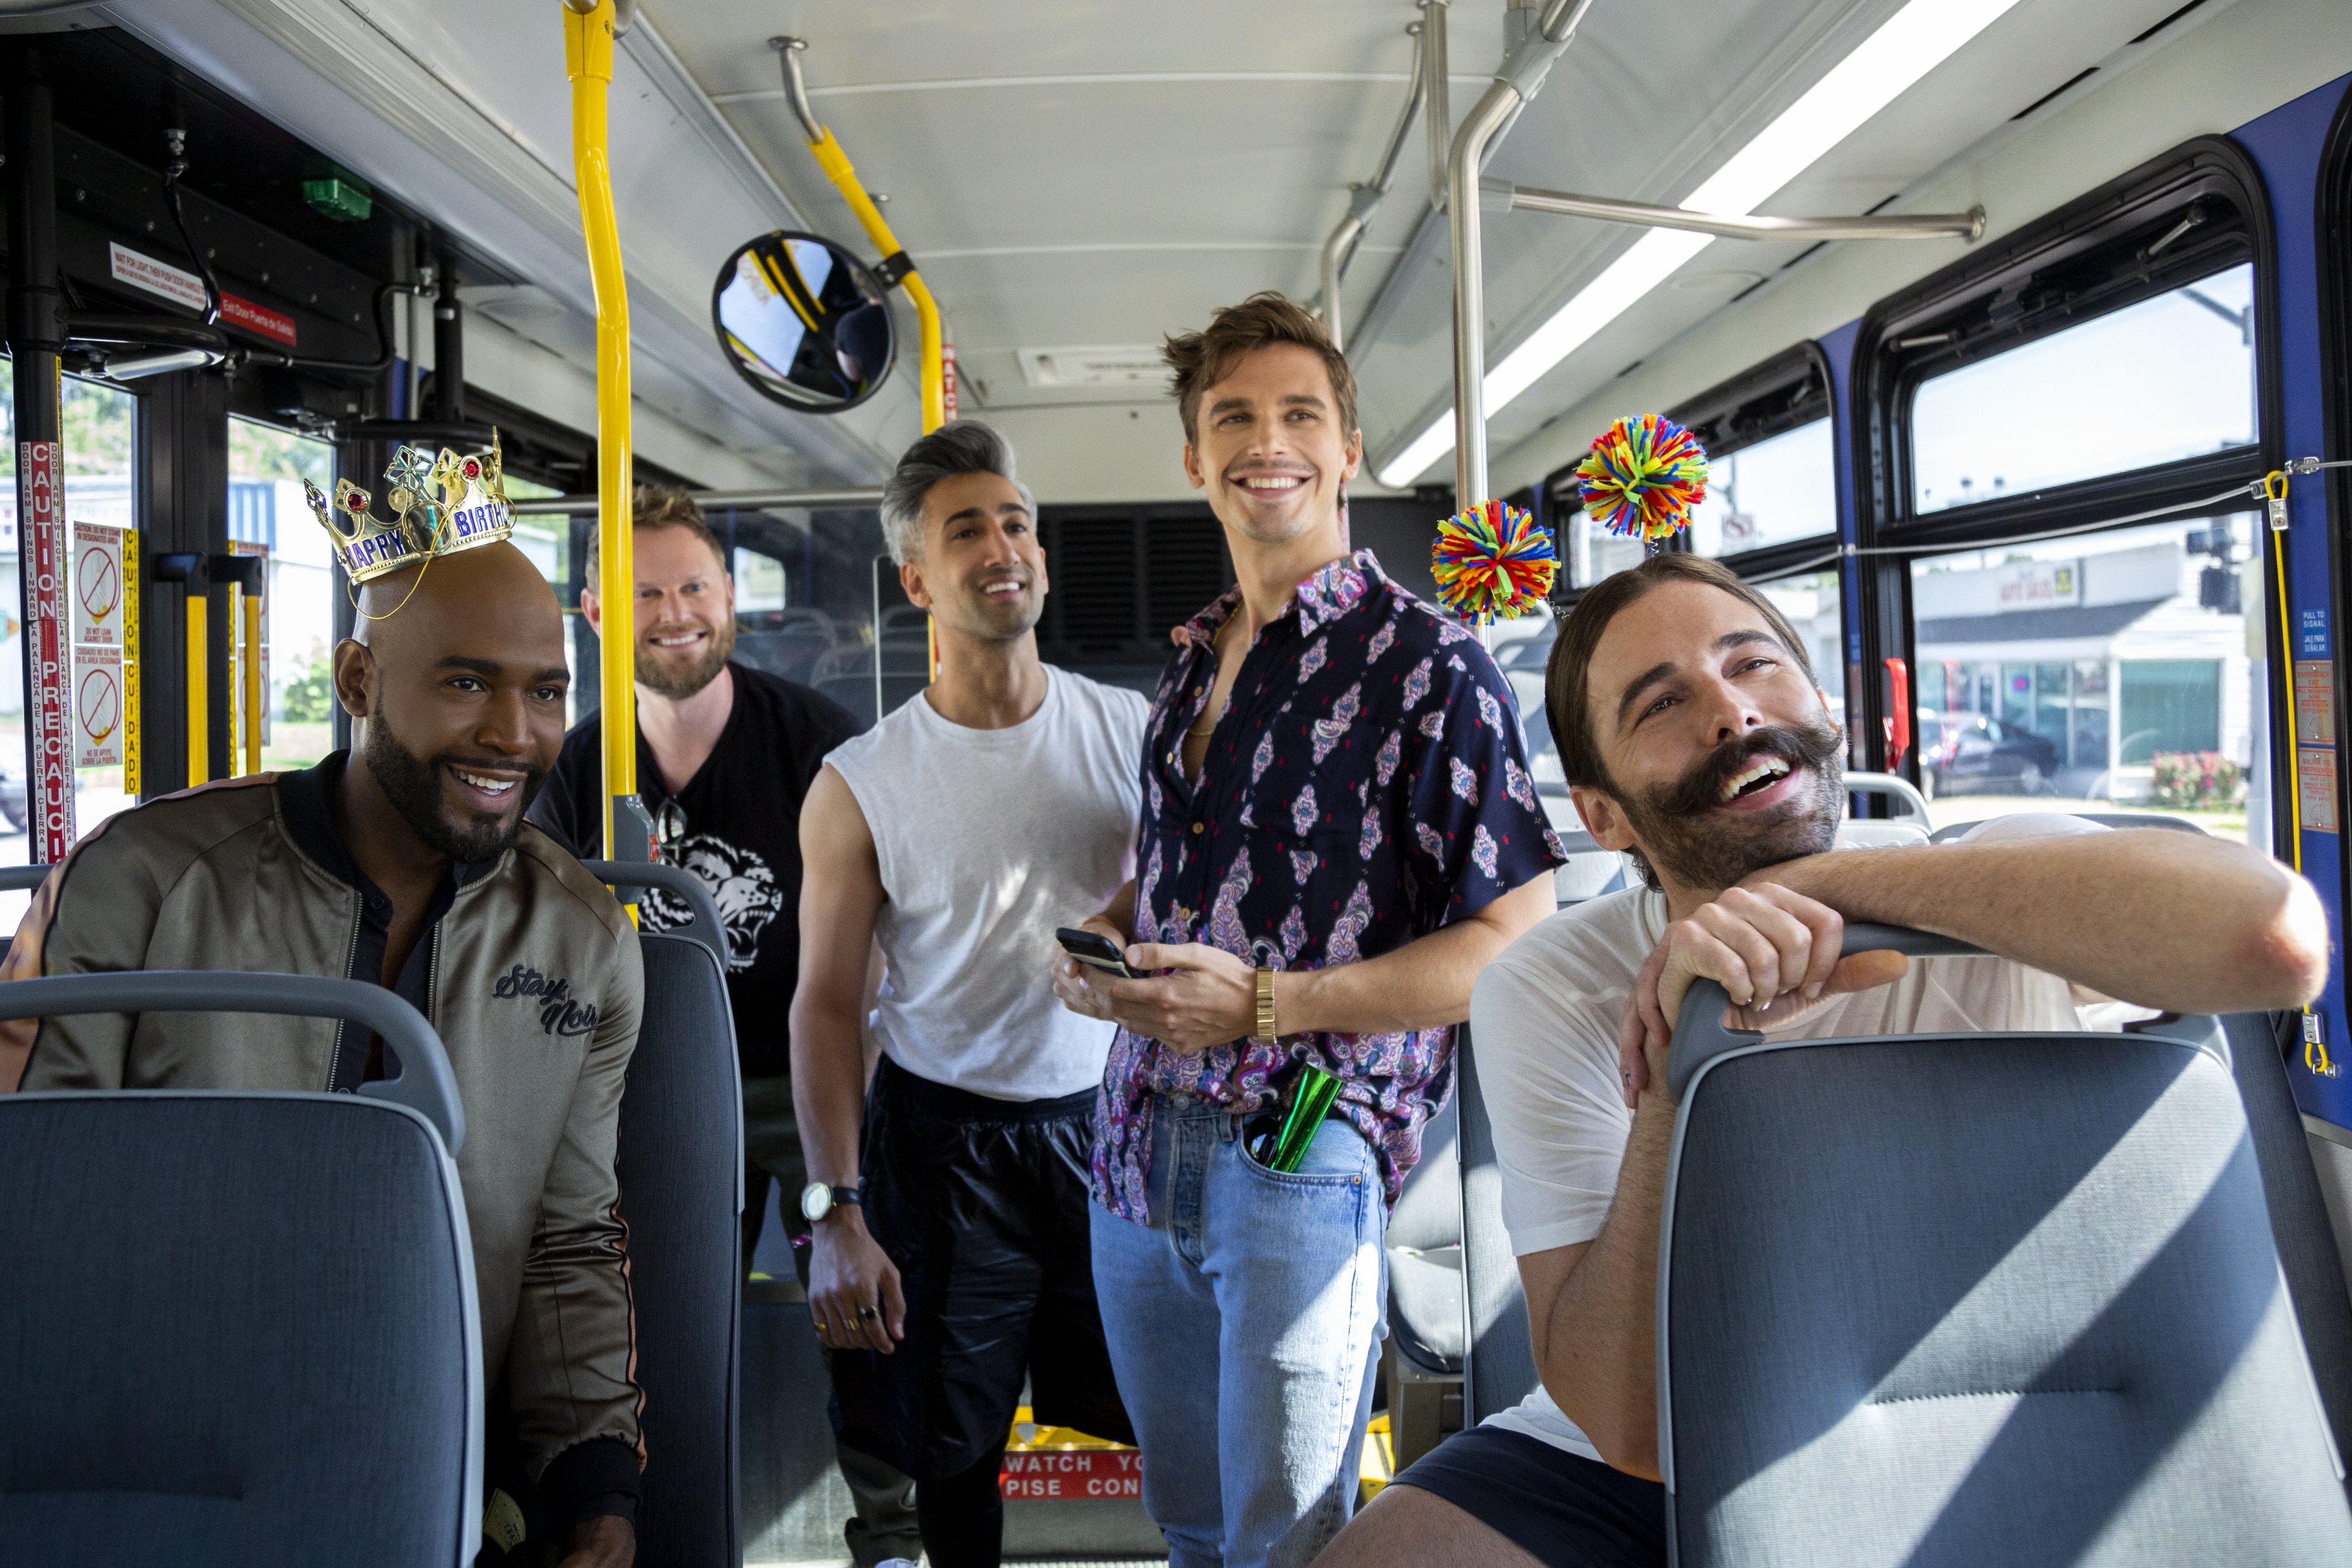 The 1st ‘Queer Eye’ S3 Trailer Is Here If You’re In The Mood To Cry Your Eyes Out